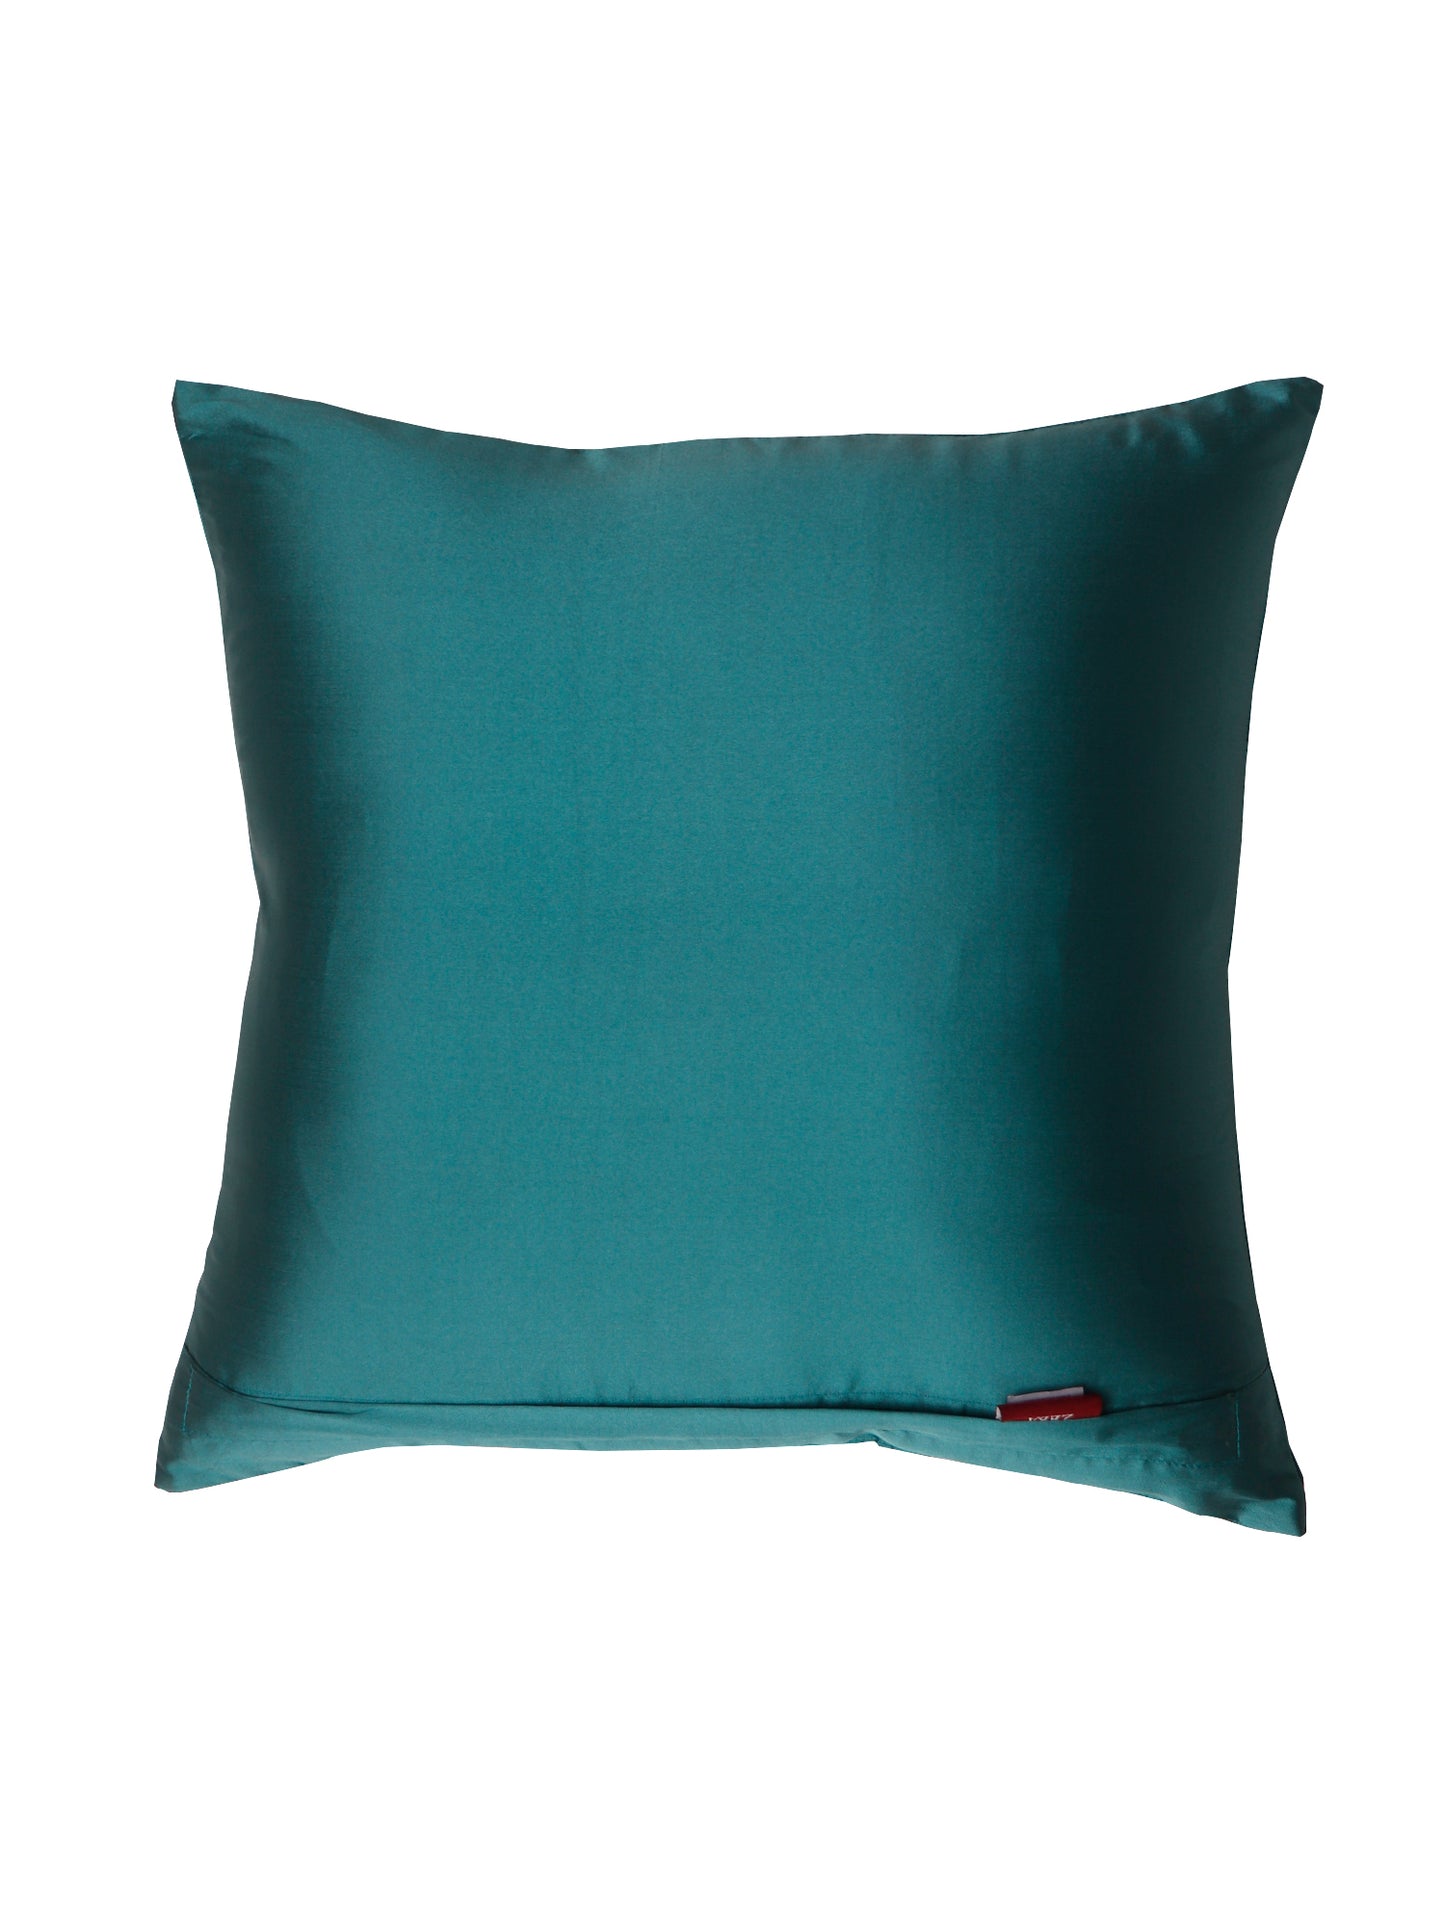 Cushion Cover Polyester Zari Embroidery with Self Quilting Aqua Green - 16"x 16"